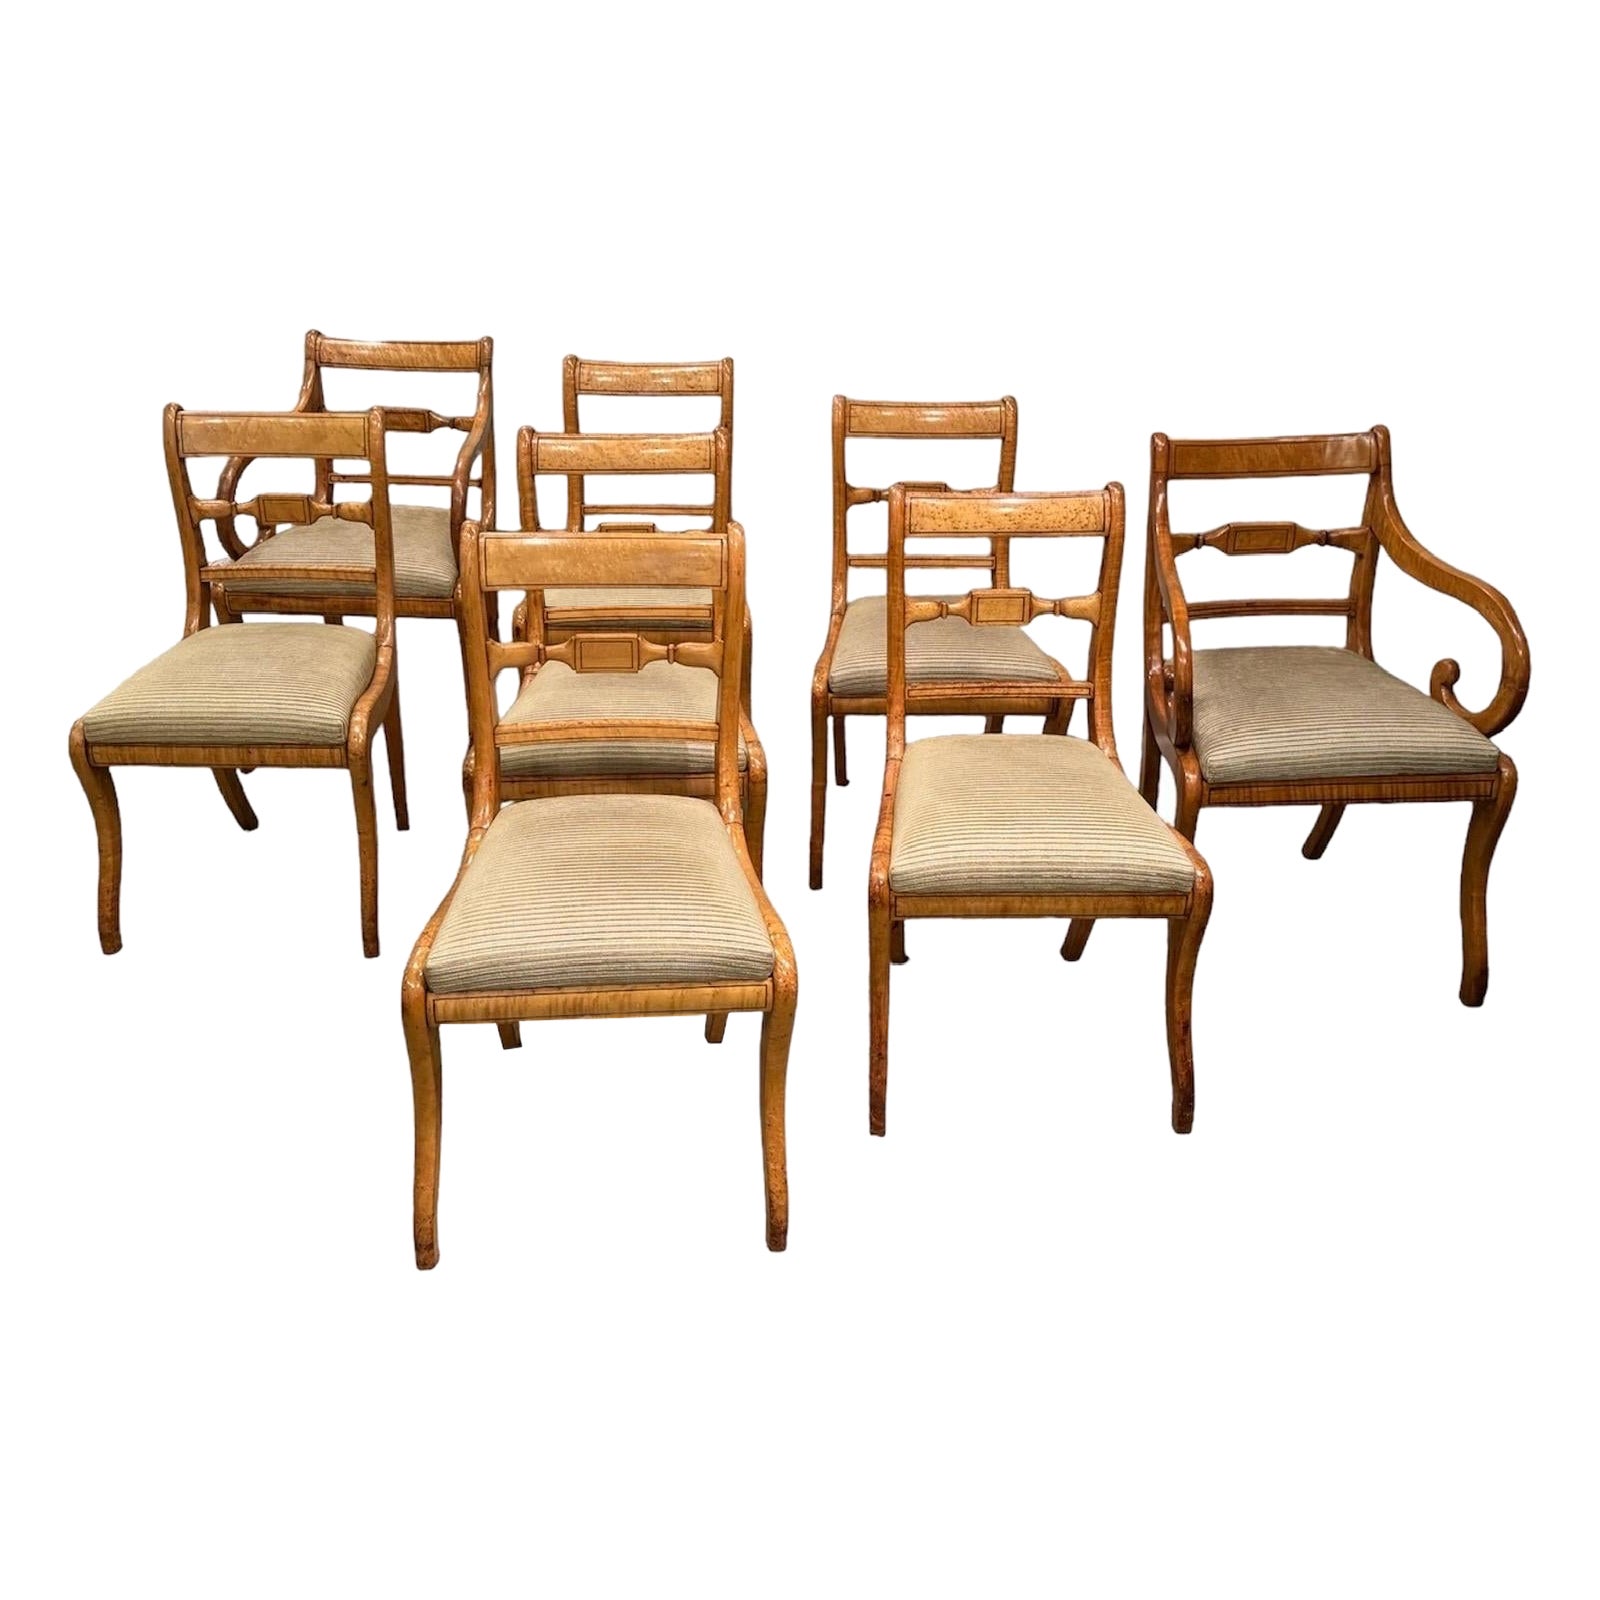 8 Regency Dining Chairs 
Tiger Maple, and birdseye maple 